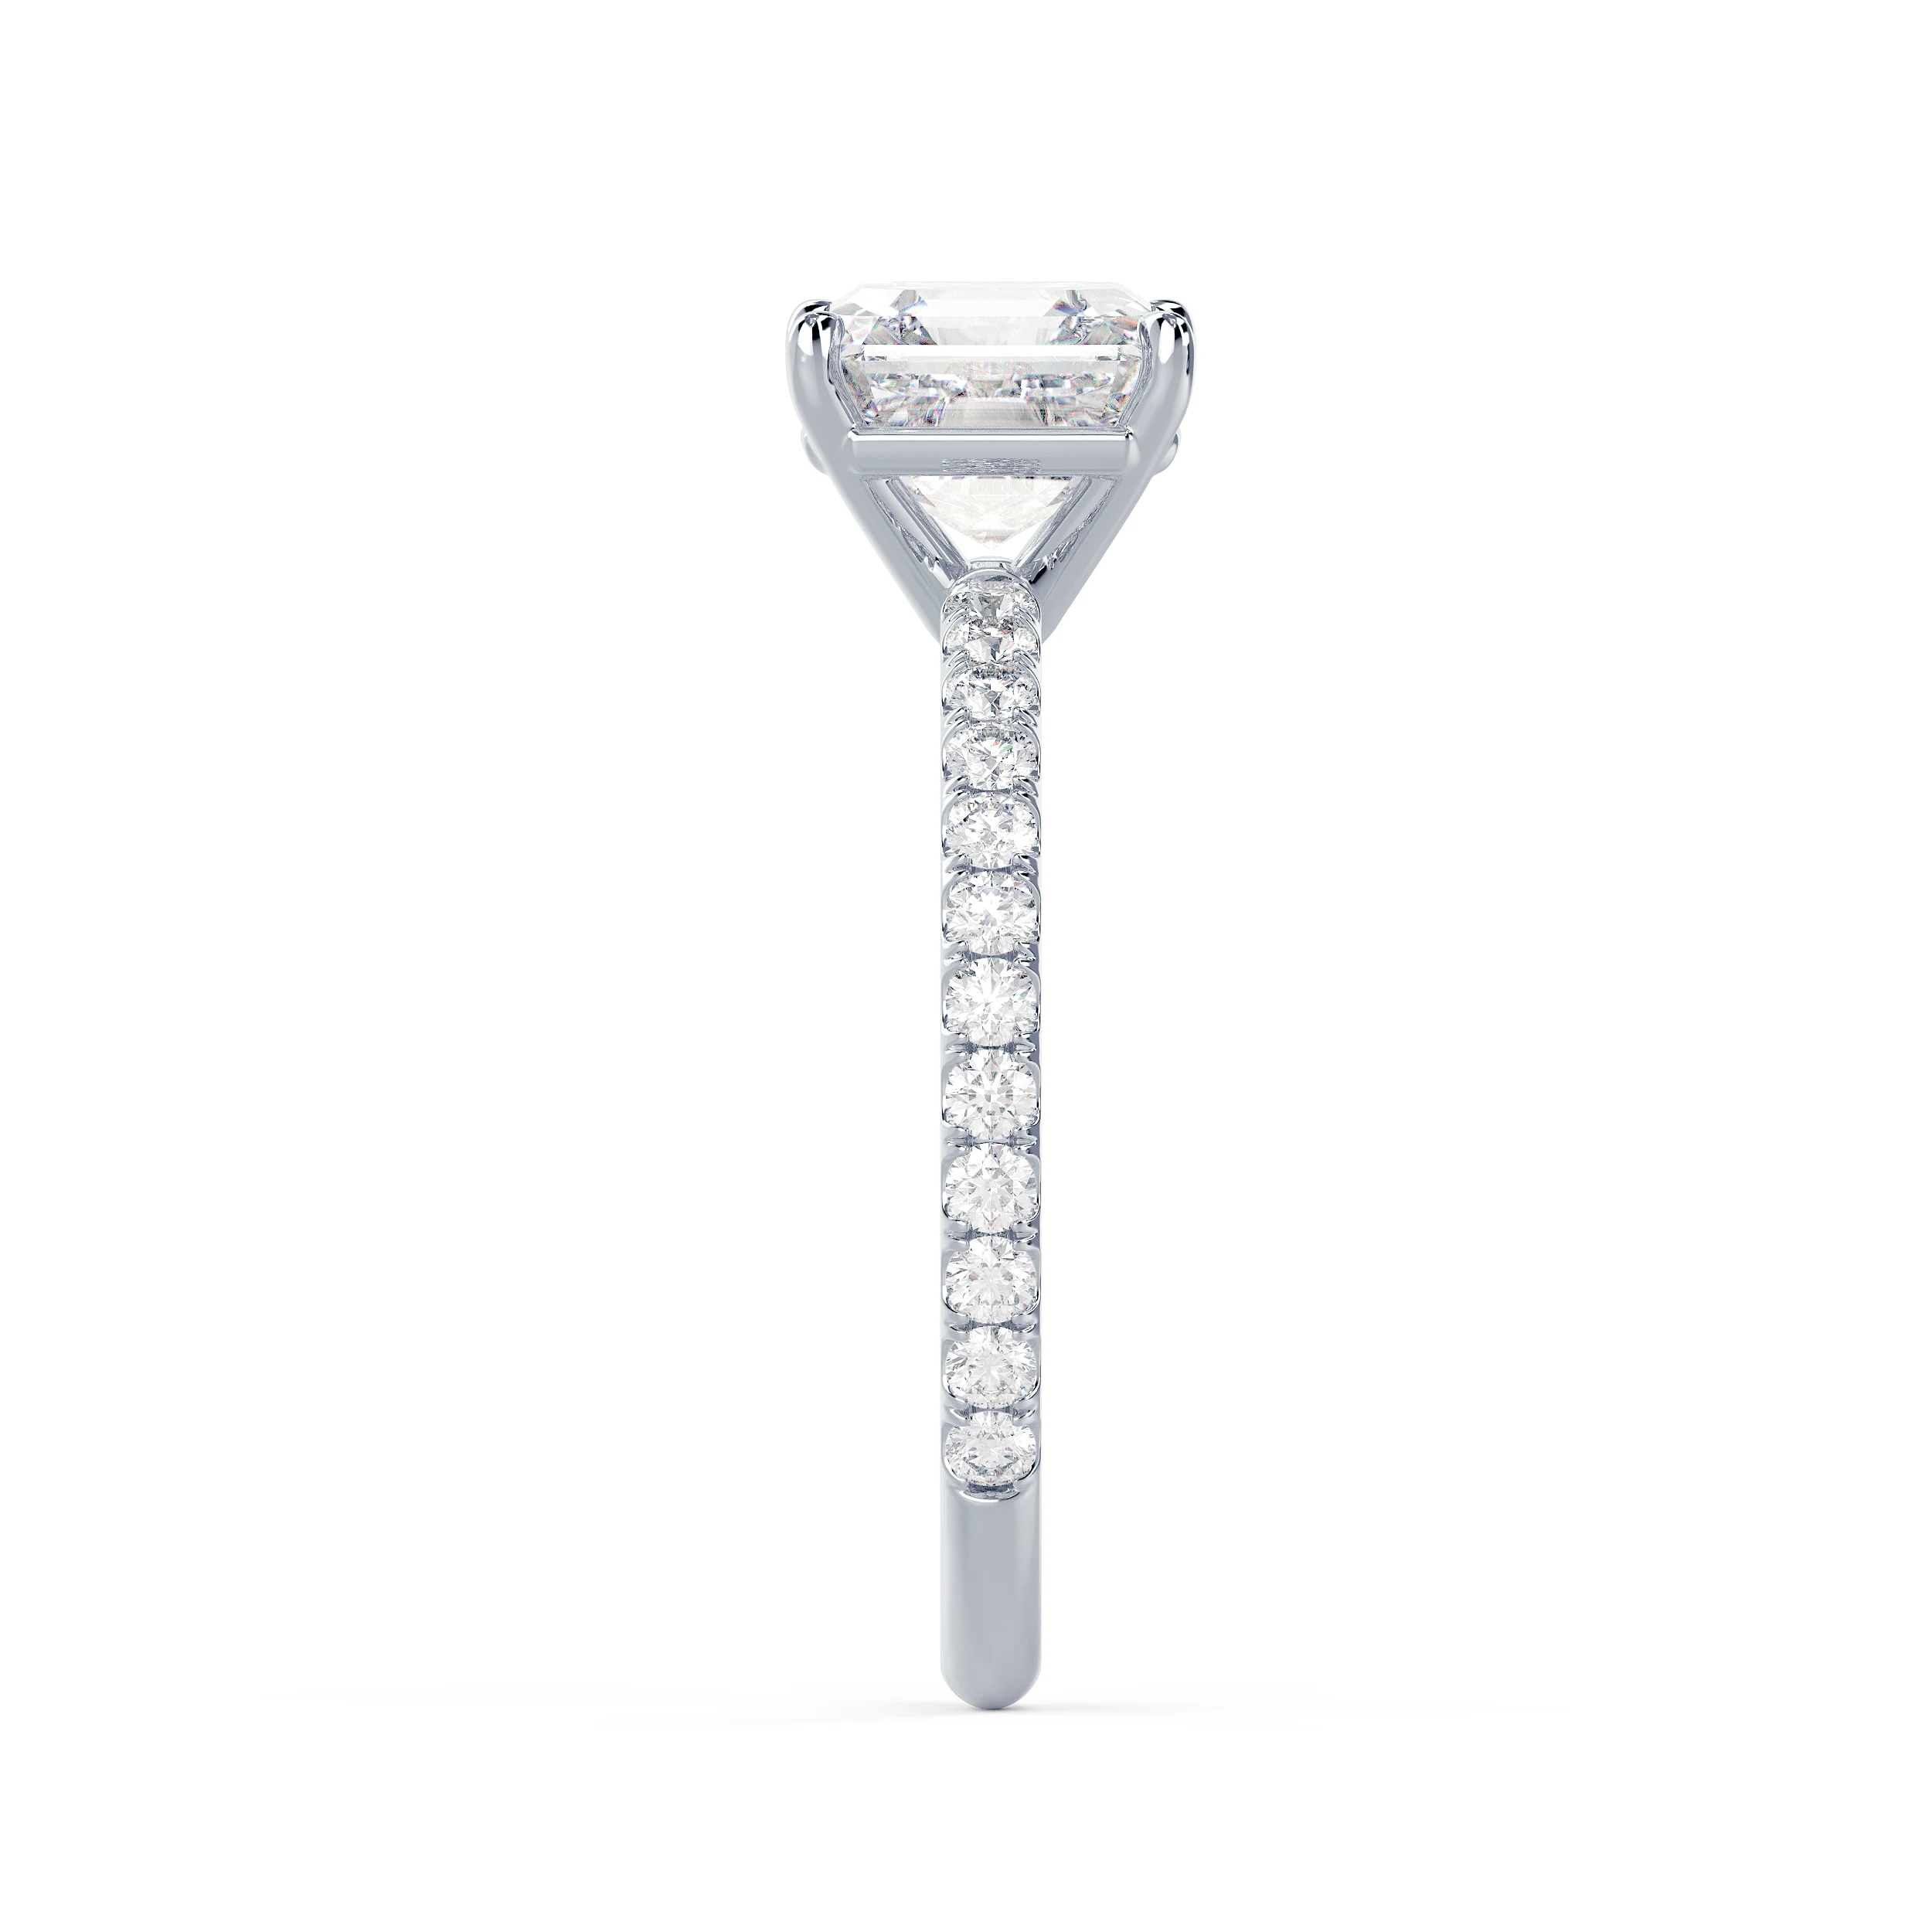 Diamonds set in White Gold Asscher Petite Four Prong Pavé Setting (Side View)